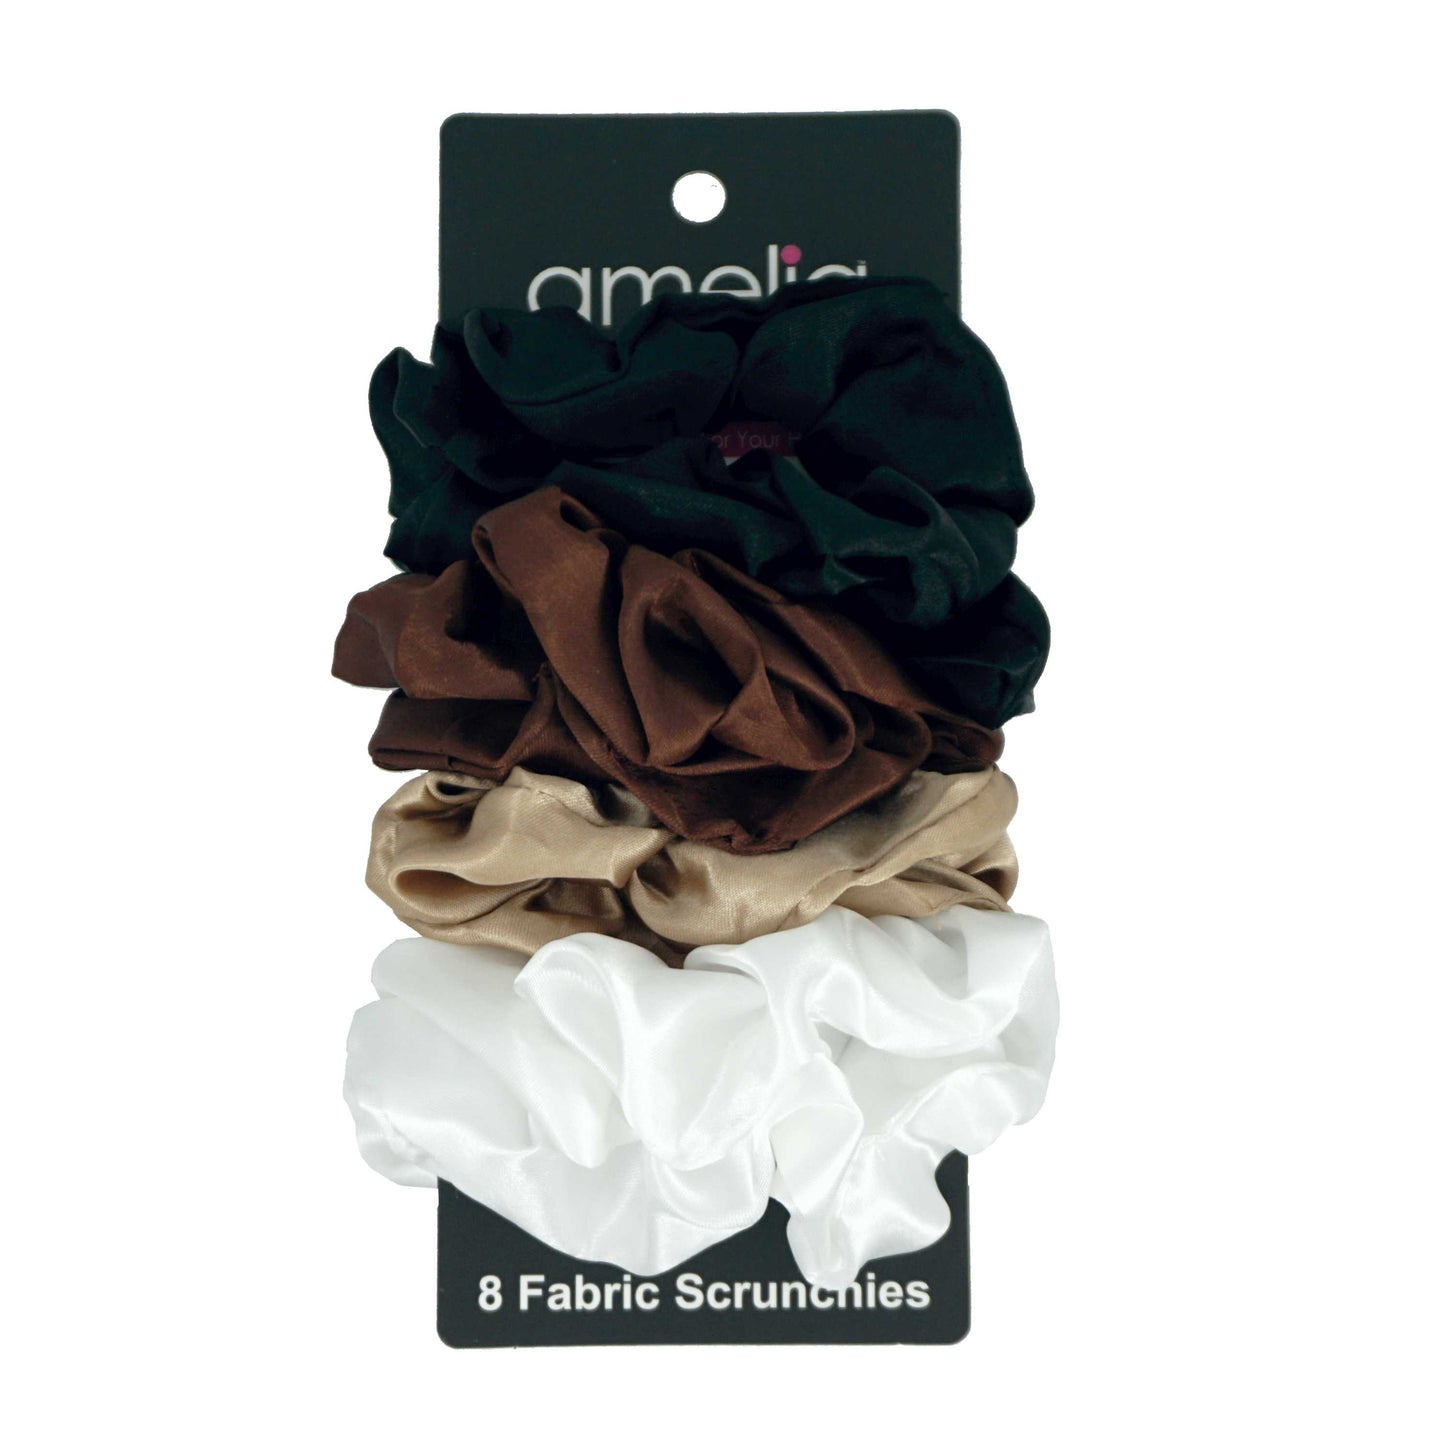 Amelia Beauty Products,  Earth Blend Satin Scrunchies, 3.5in Diameter, Gentle on Hair, Strong Hold, No Snag, No Dents or Creases. 8 Pack